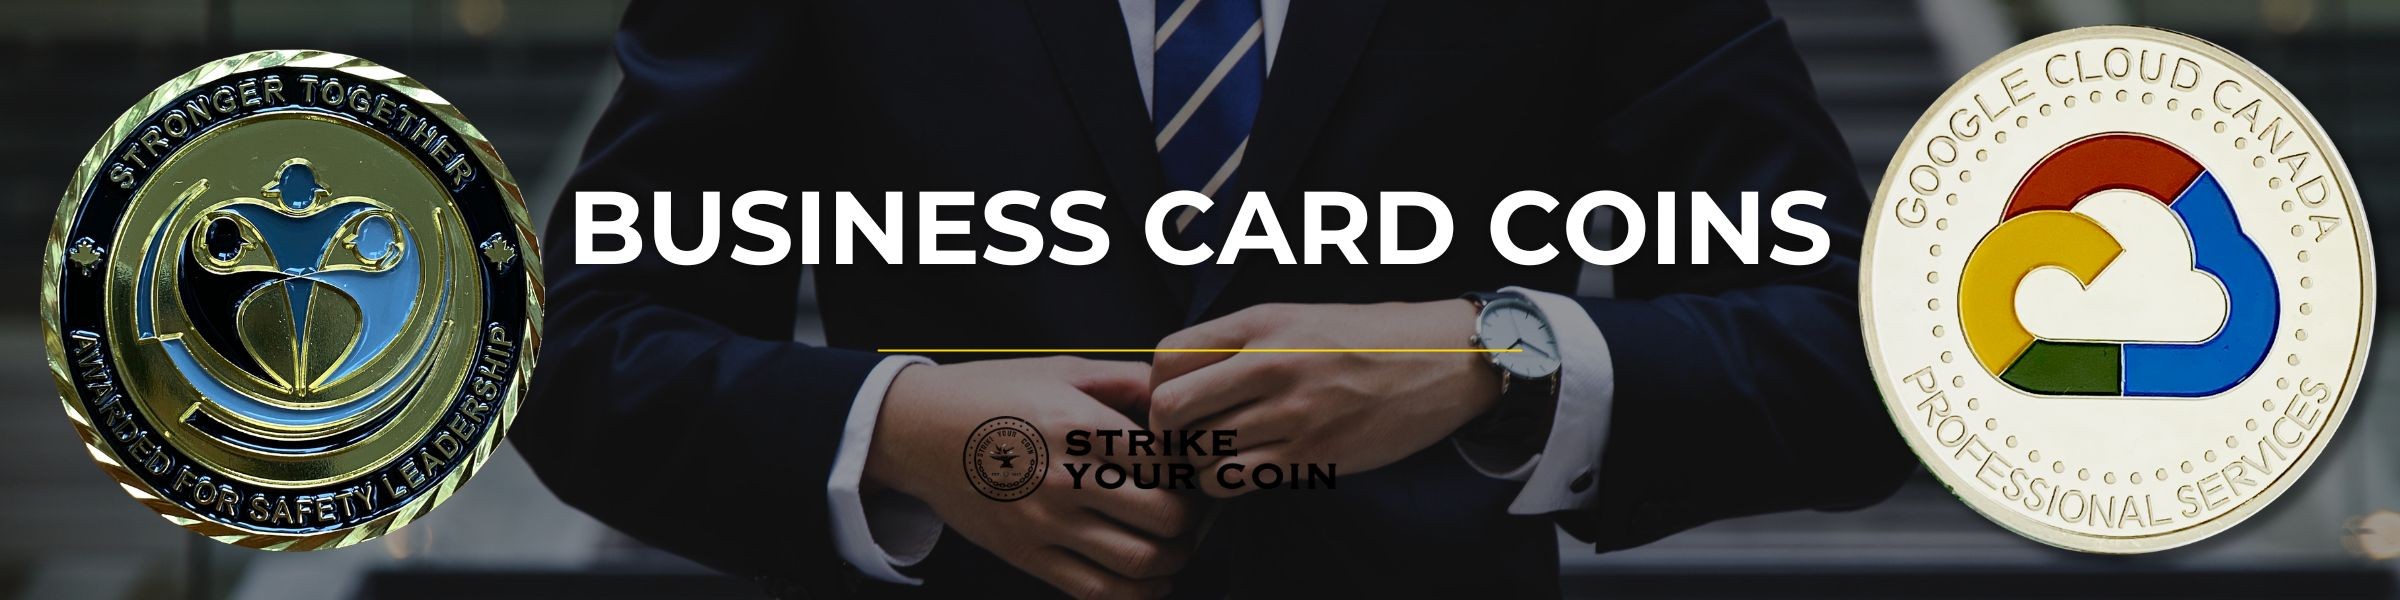 business card coins